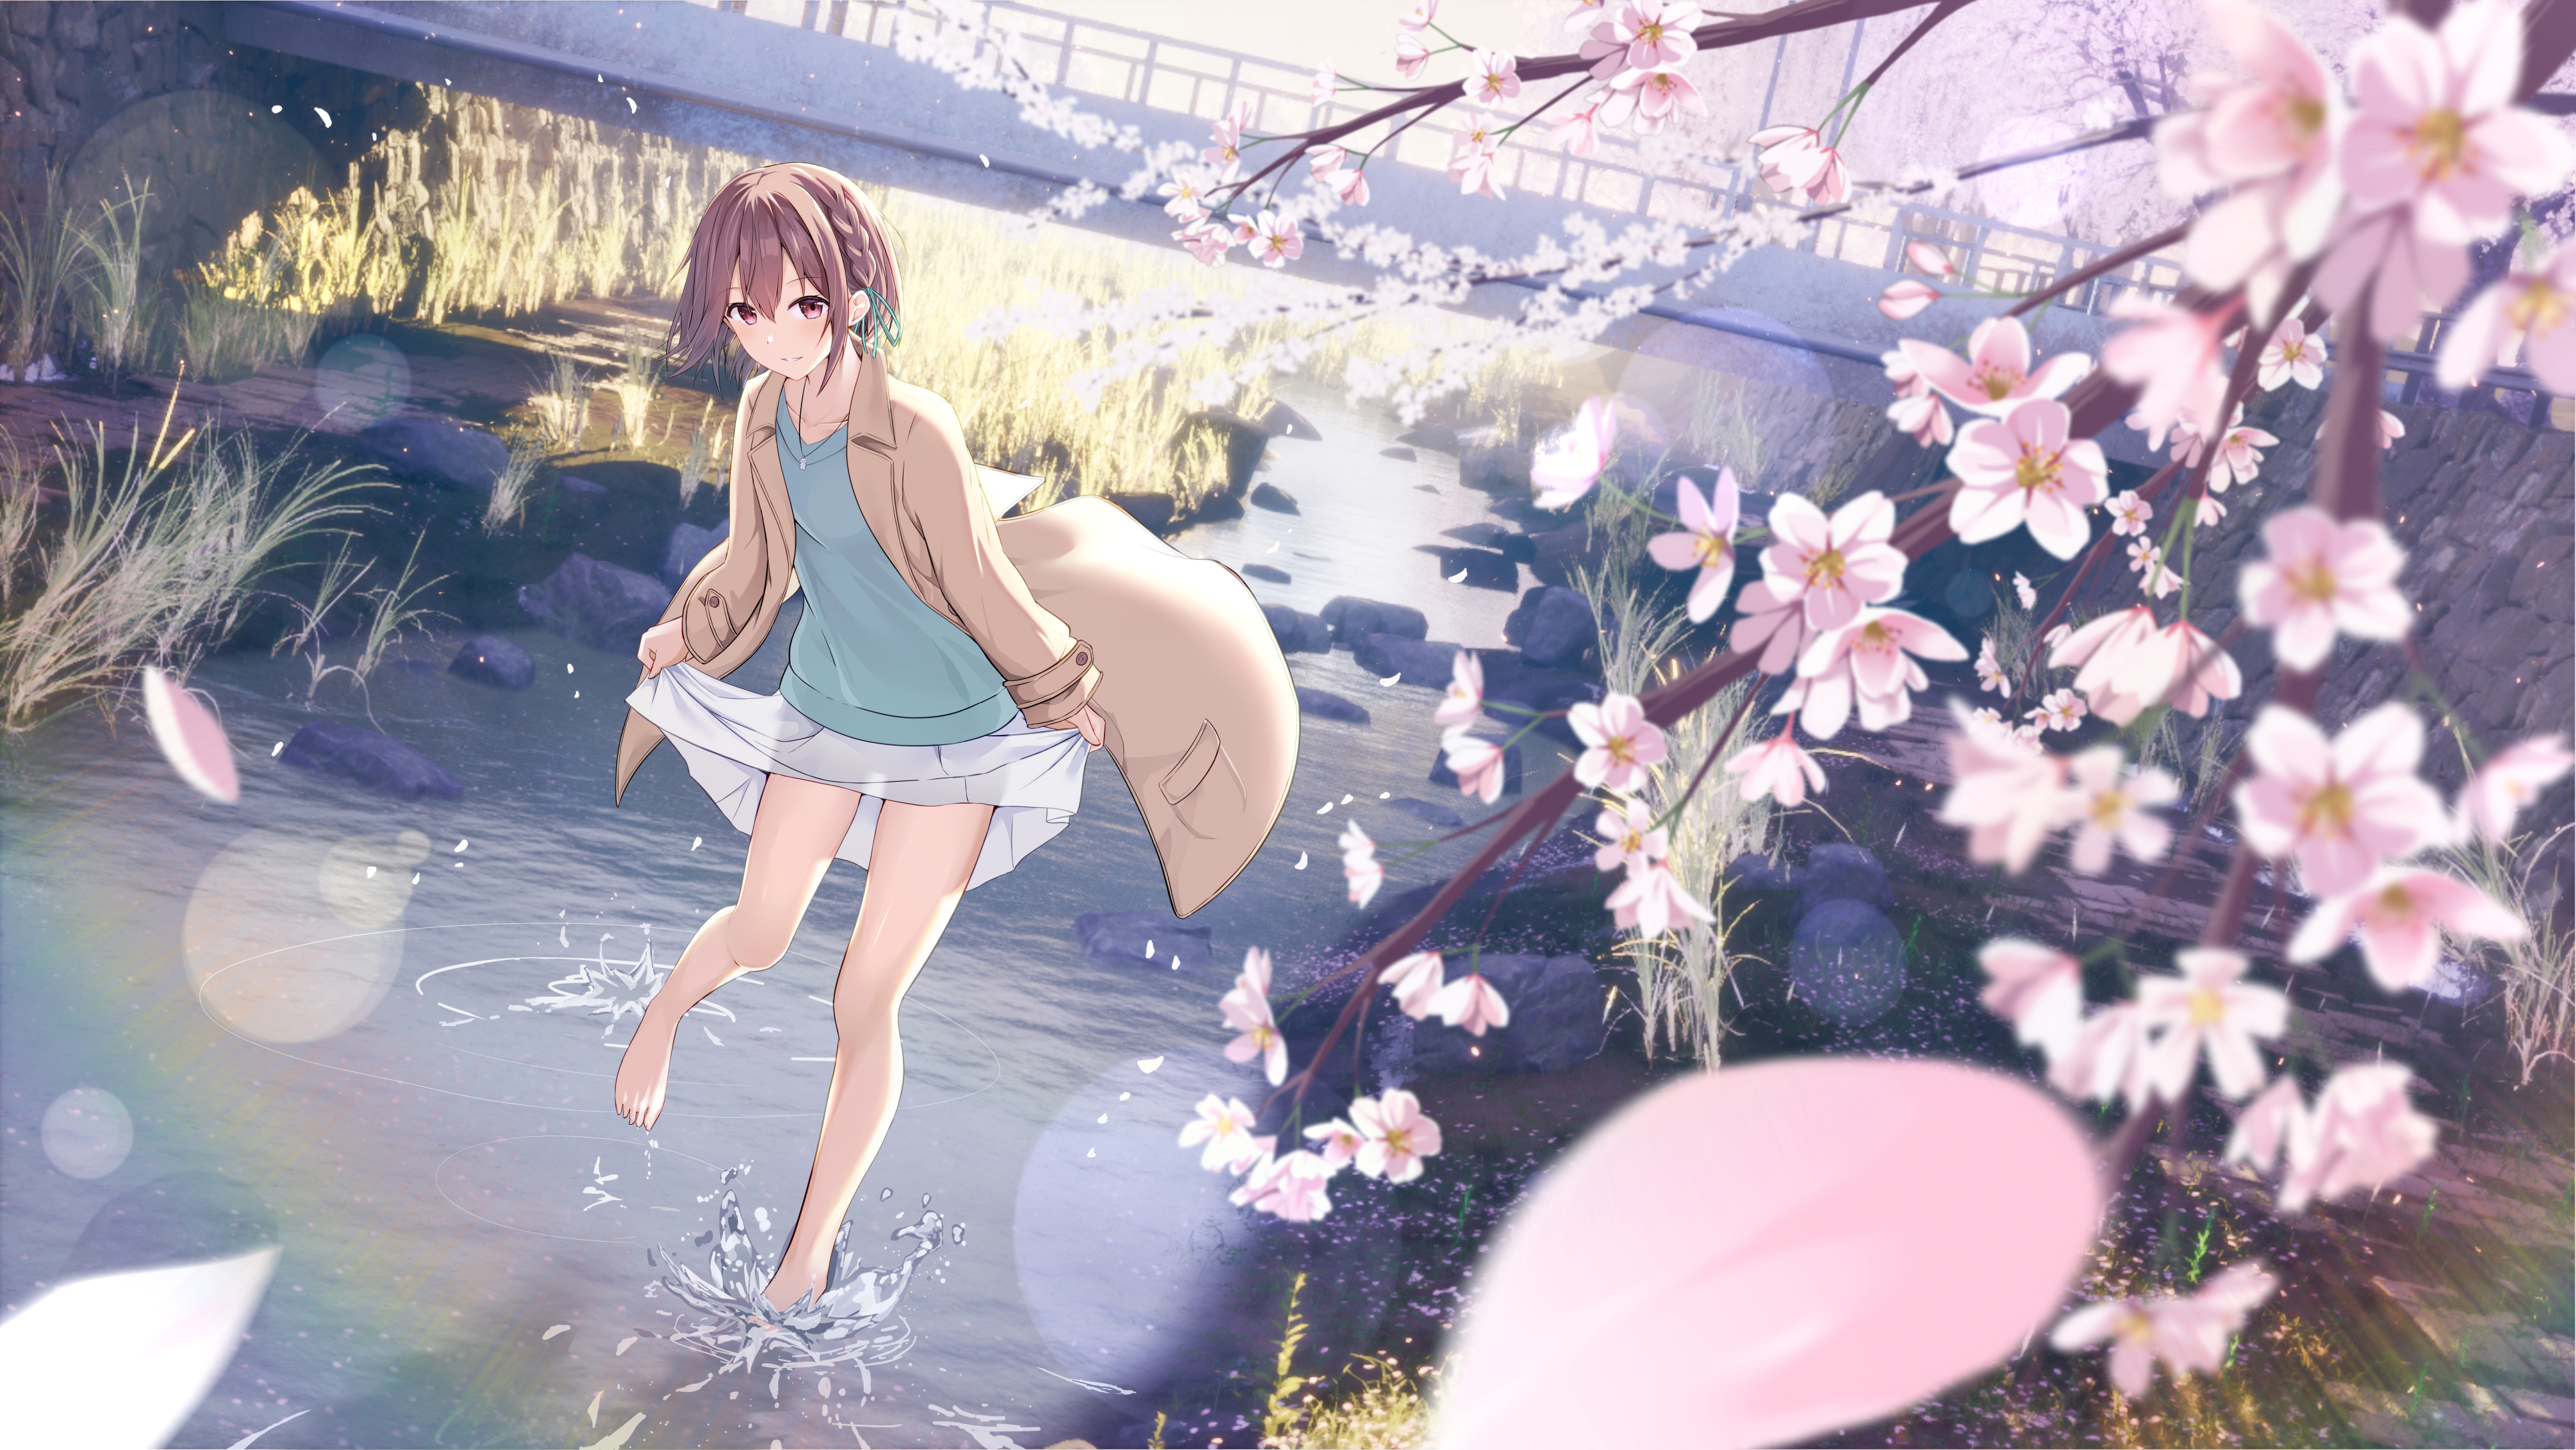 Anime 3860x2172 anime anime girls water lifting skirt petals flowers branch looking at viewer short hair smiling rocks standing in water sunlight rainbows